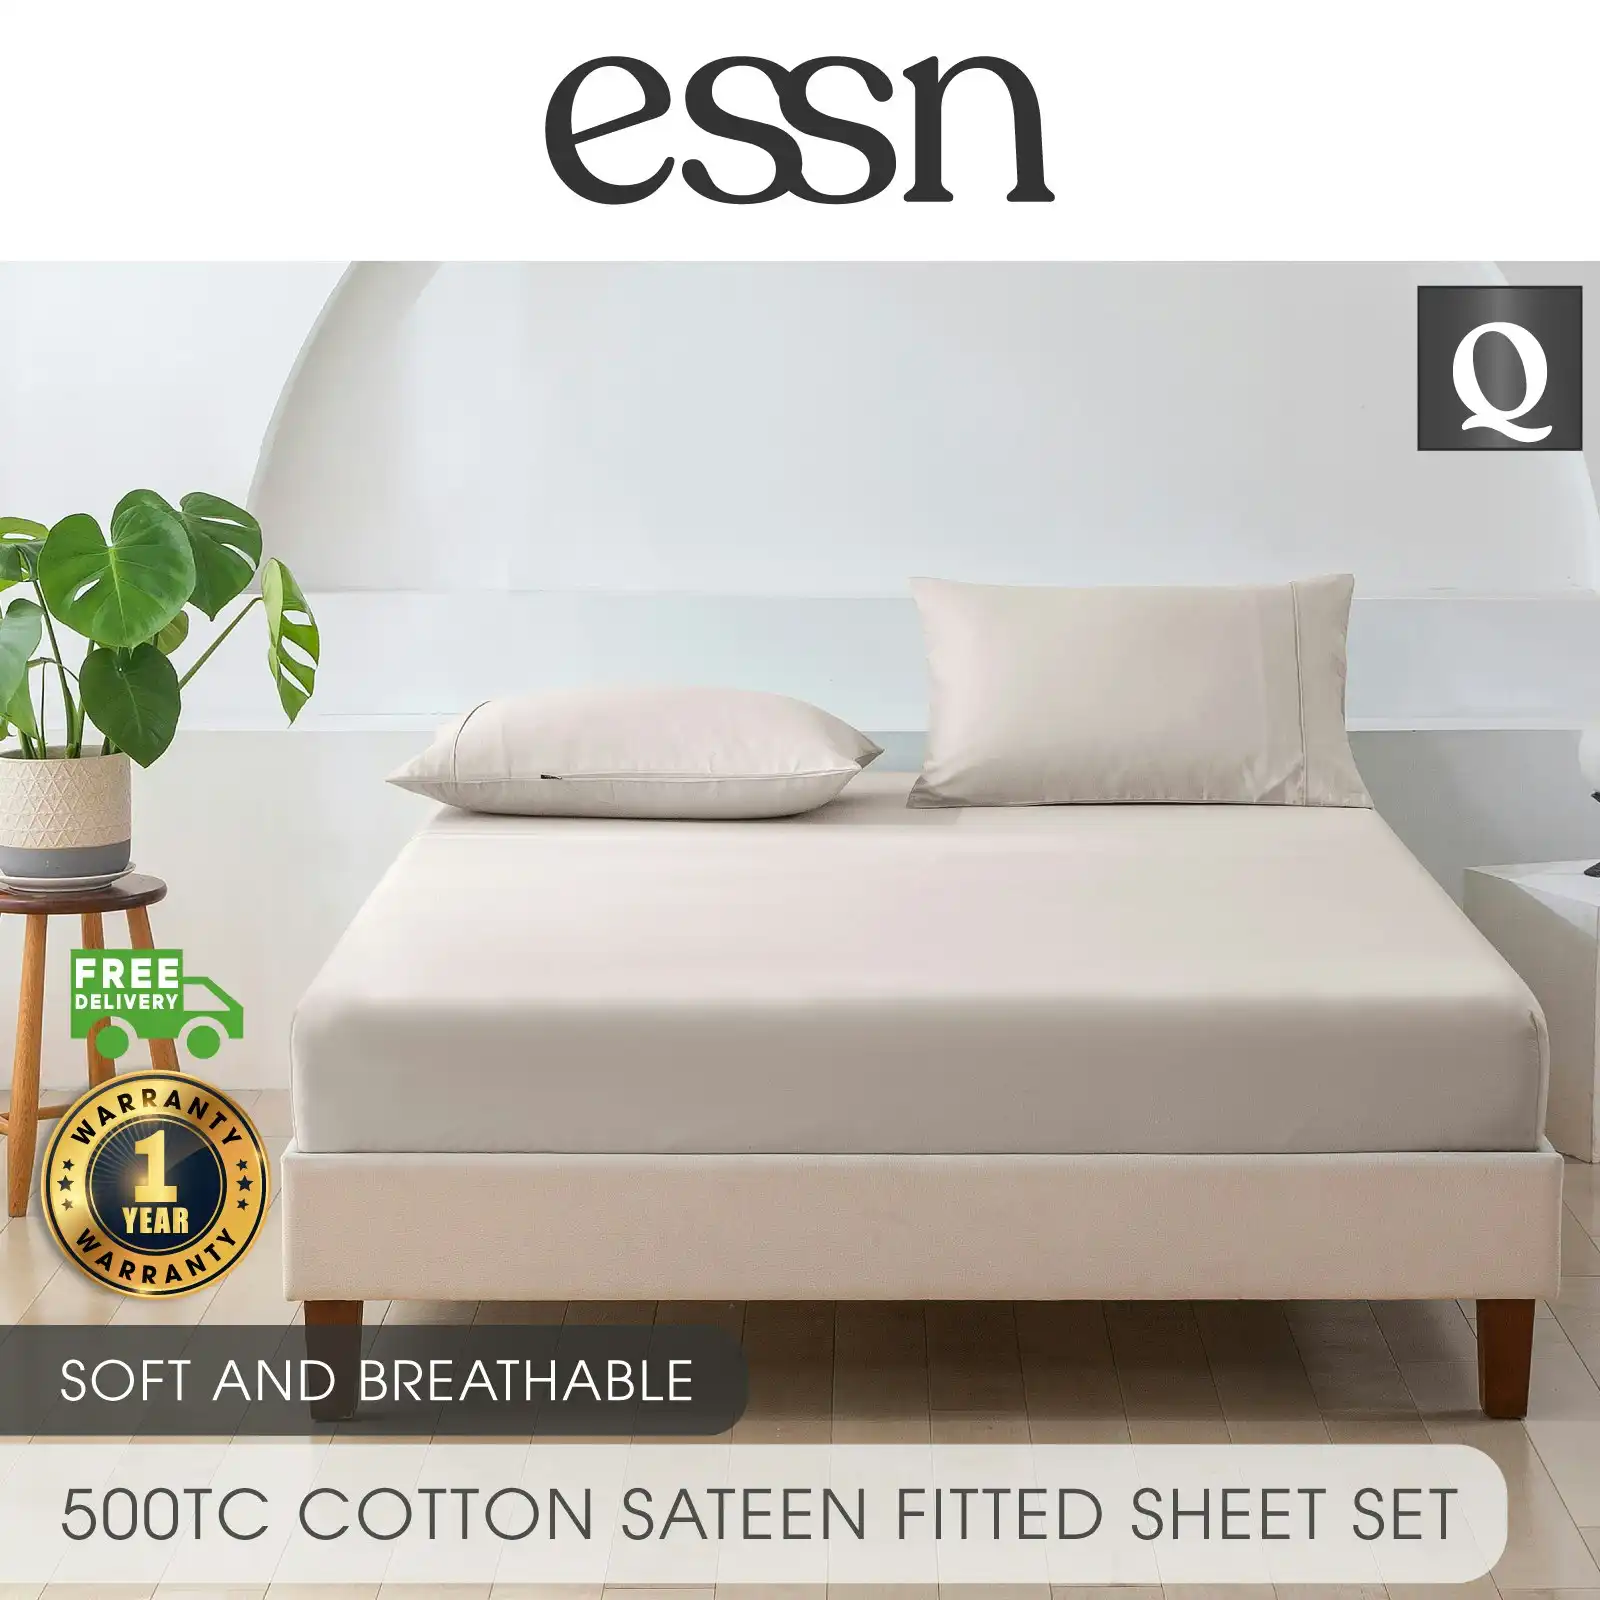 ESSN 500TC Cotton Sateen Fitted Sheet Set Stone  Queen Bed